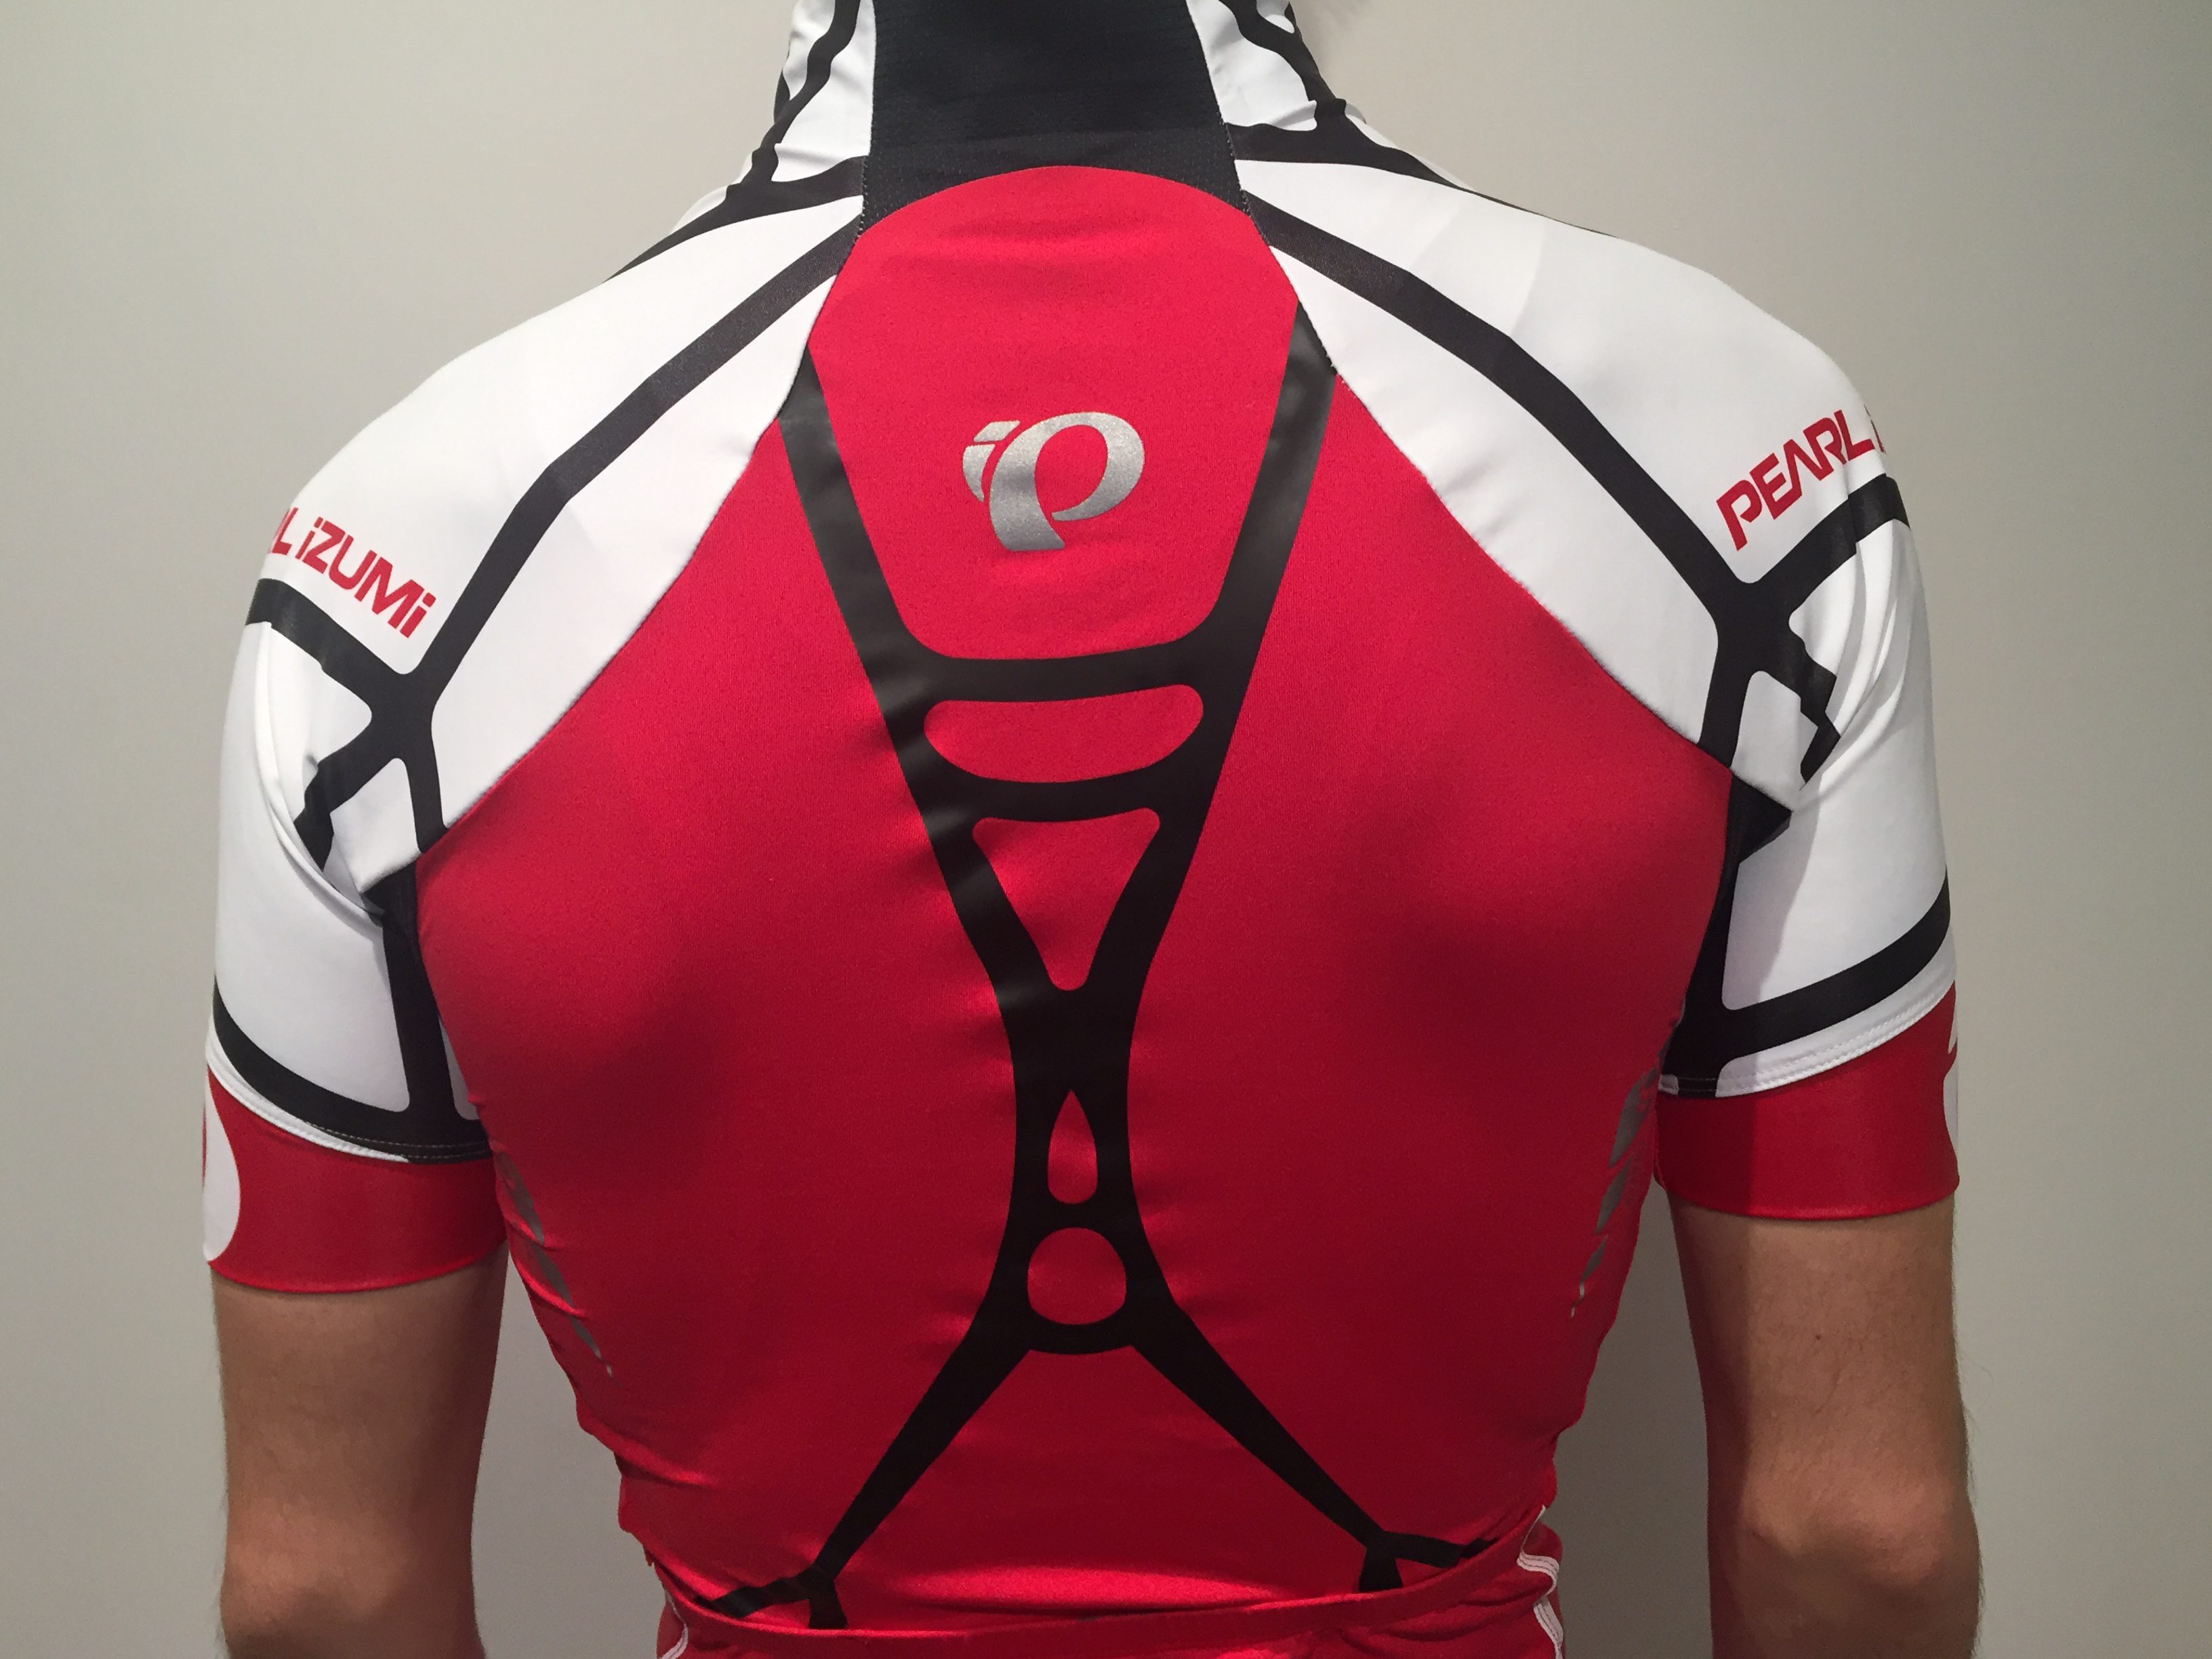 Our Pearl Izumi Cycling Gear Guide